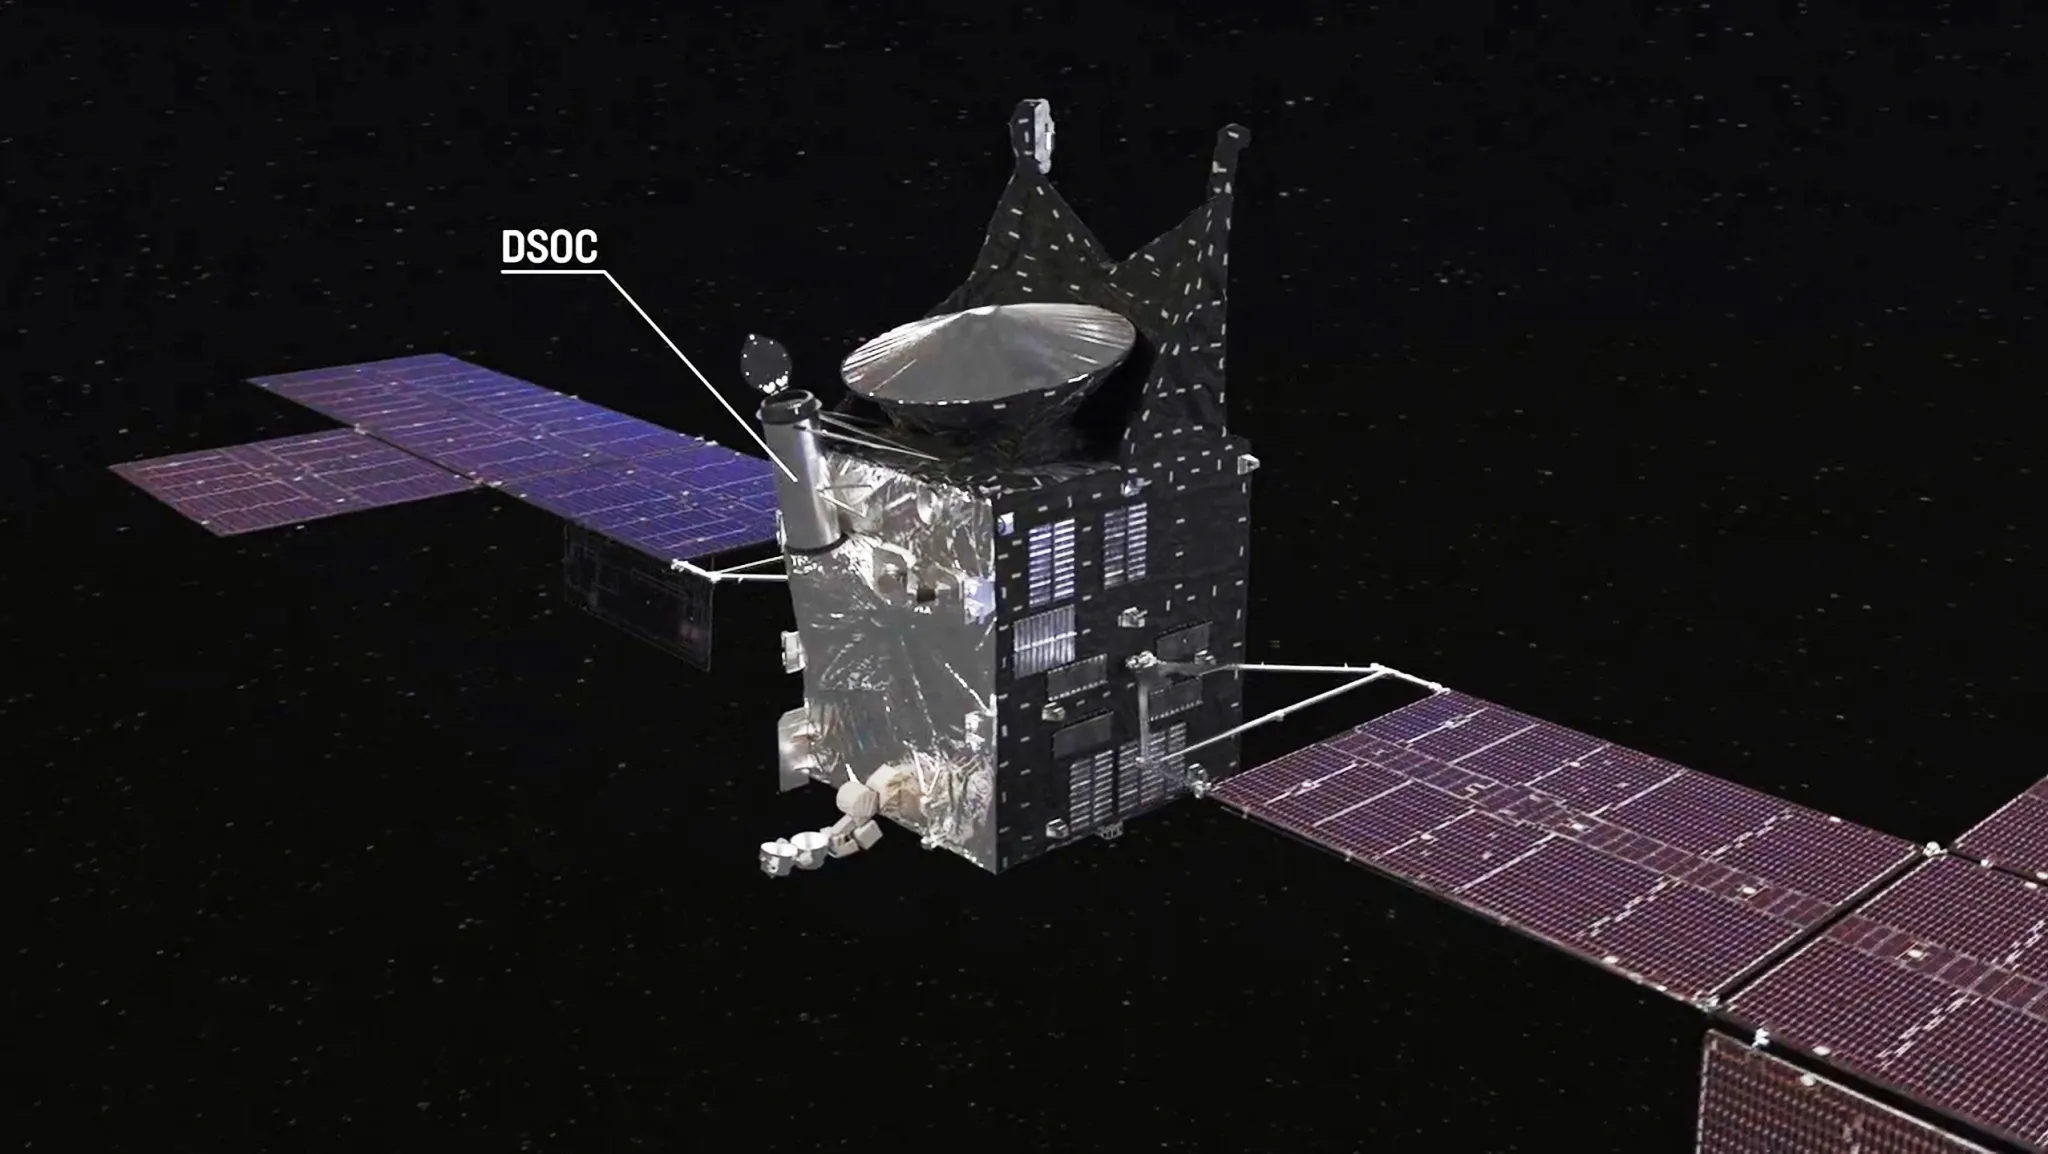 Visualization of NASA's Deep Space Optical Communications technology in space